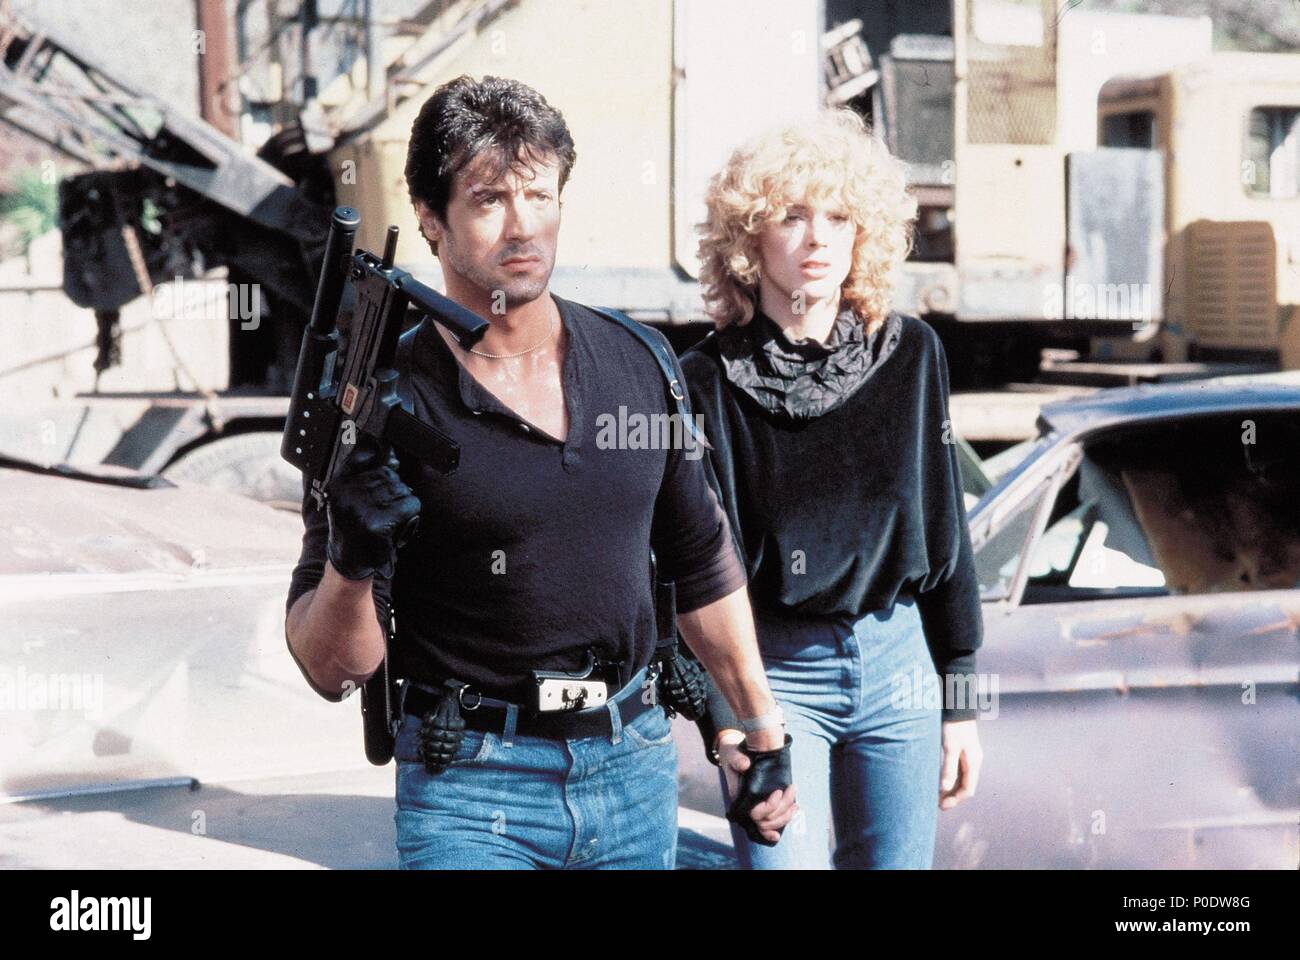 sly stallone in cobra movie guns used by